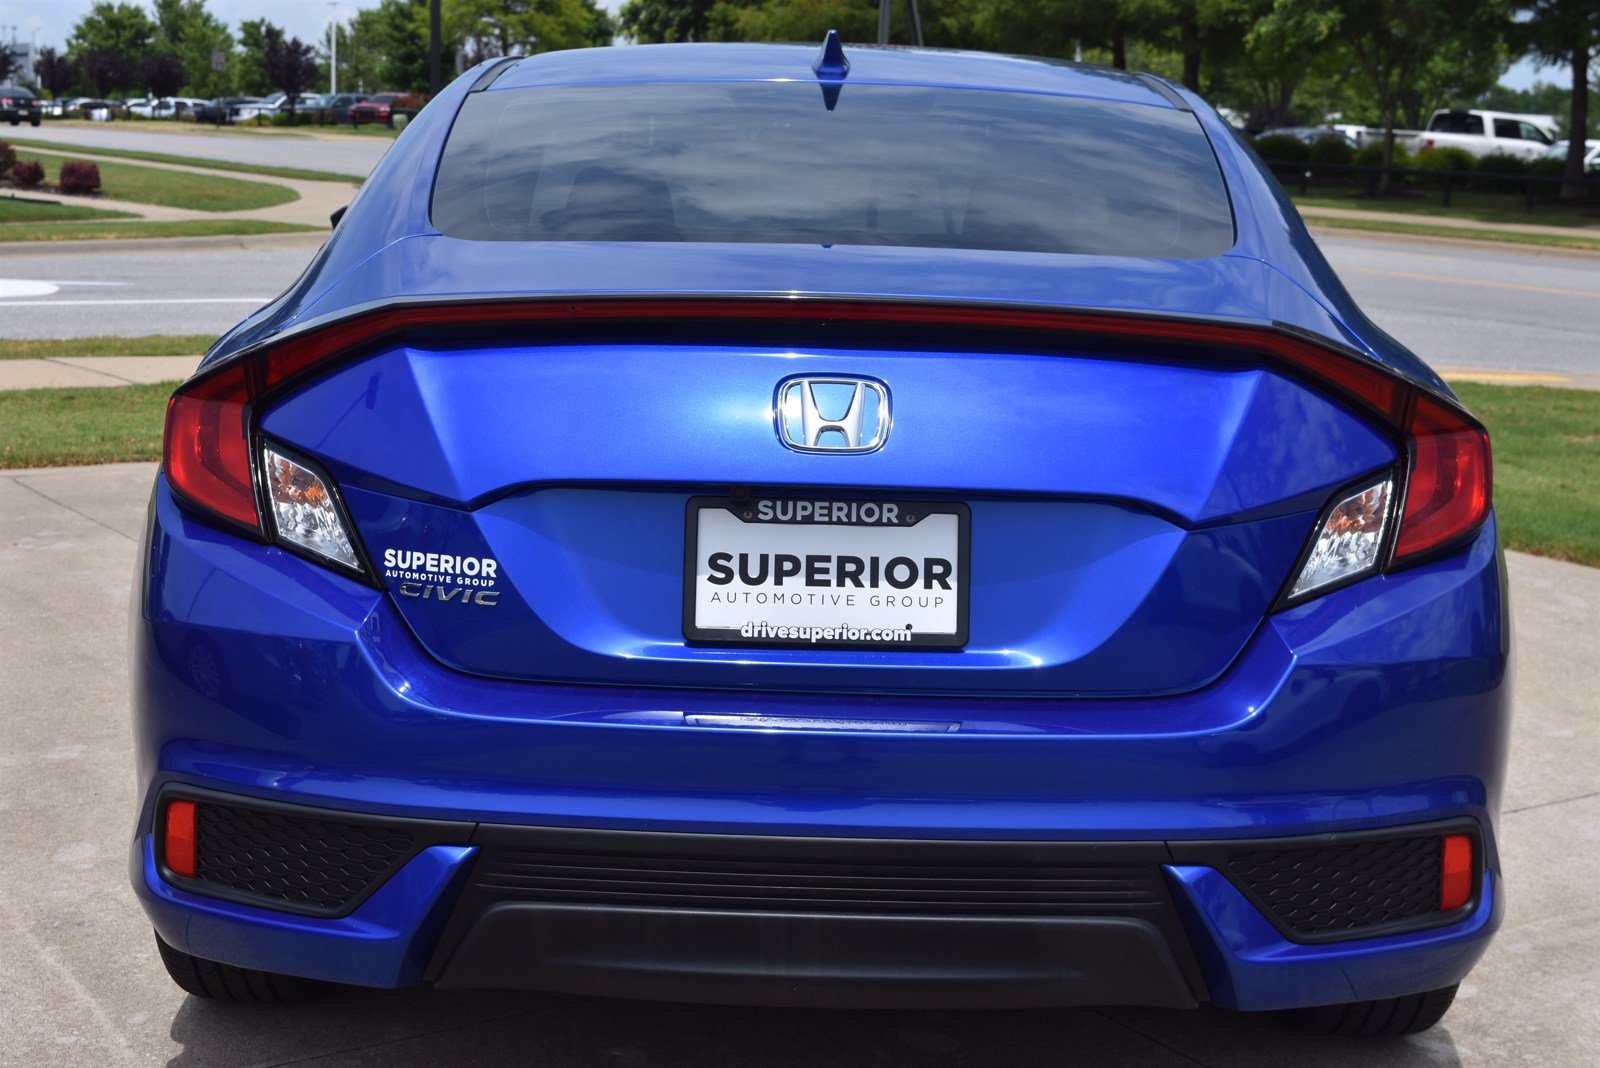 PreOwned 2017 Honda Civic Coupe EXT 2dr Car in